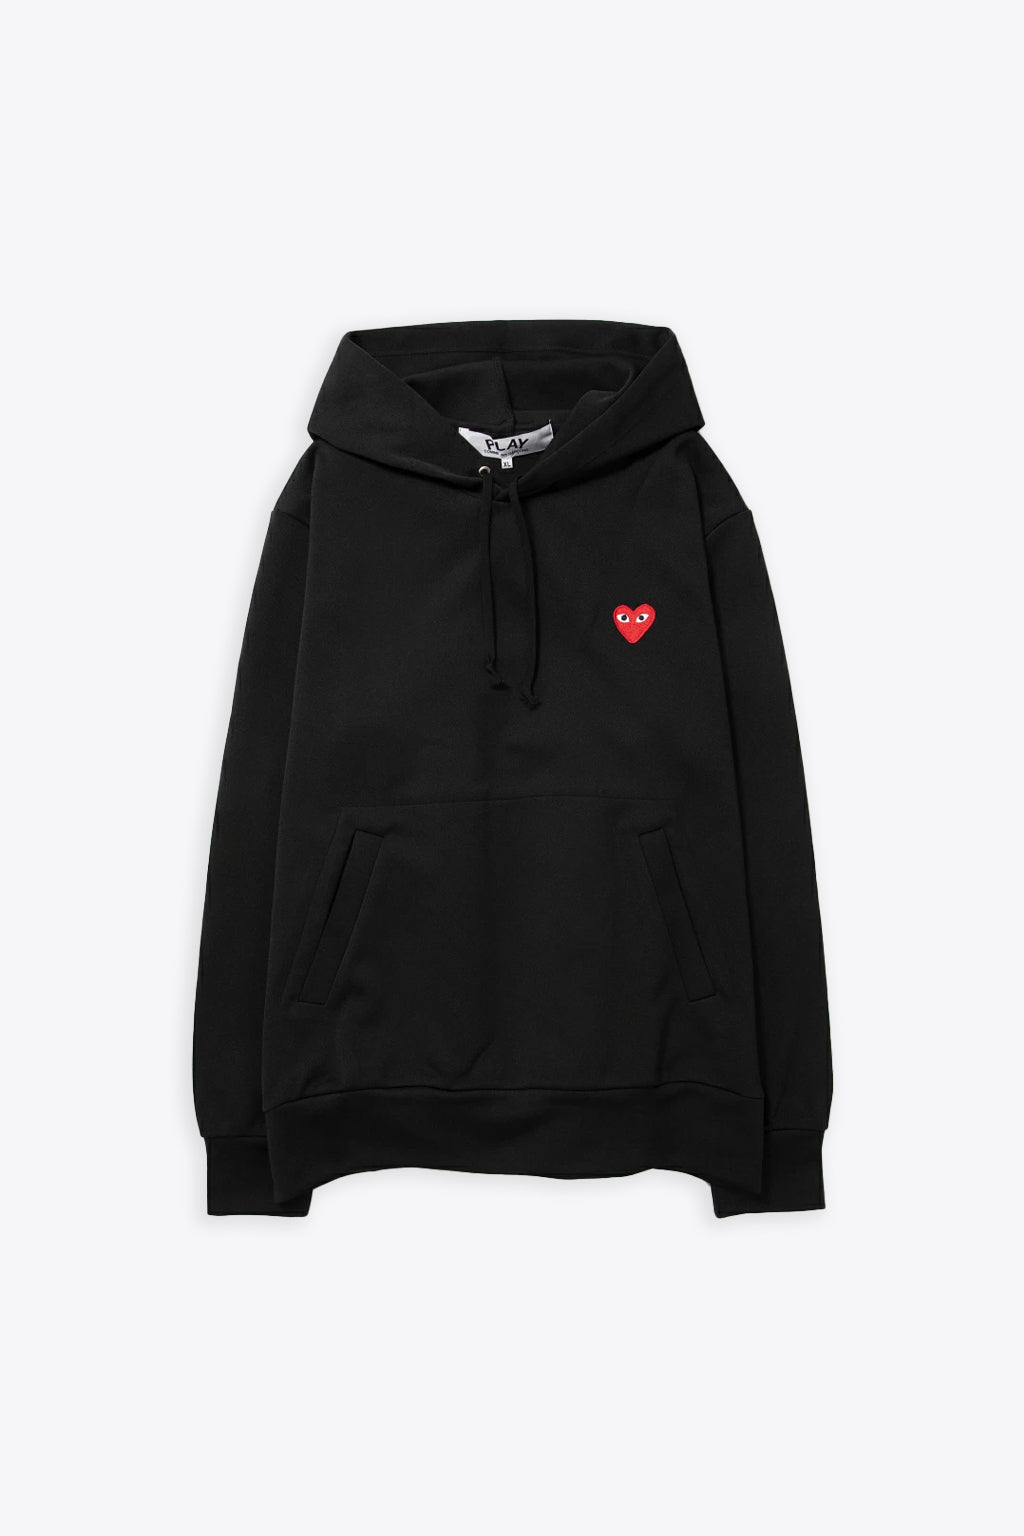 alt-image__Black-hoodie-with-heart-patch-at-chest